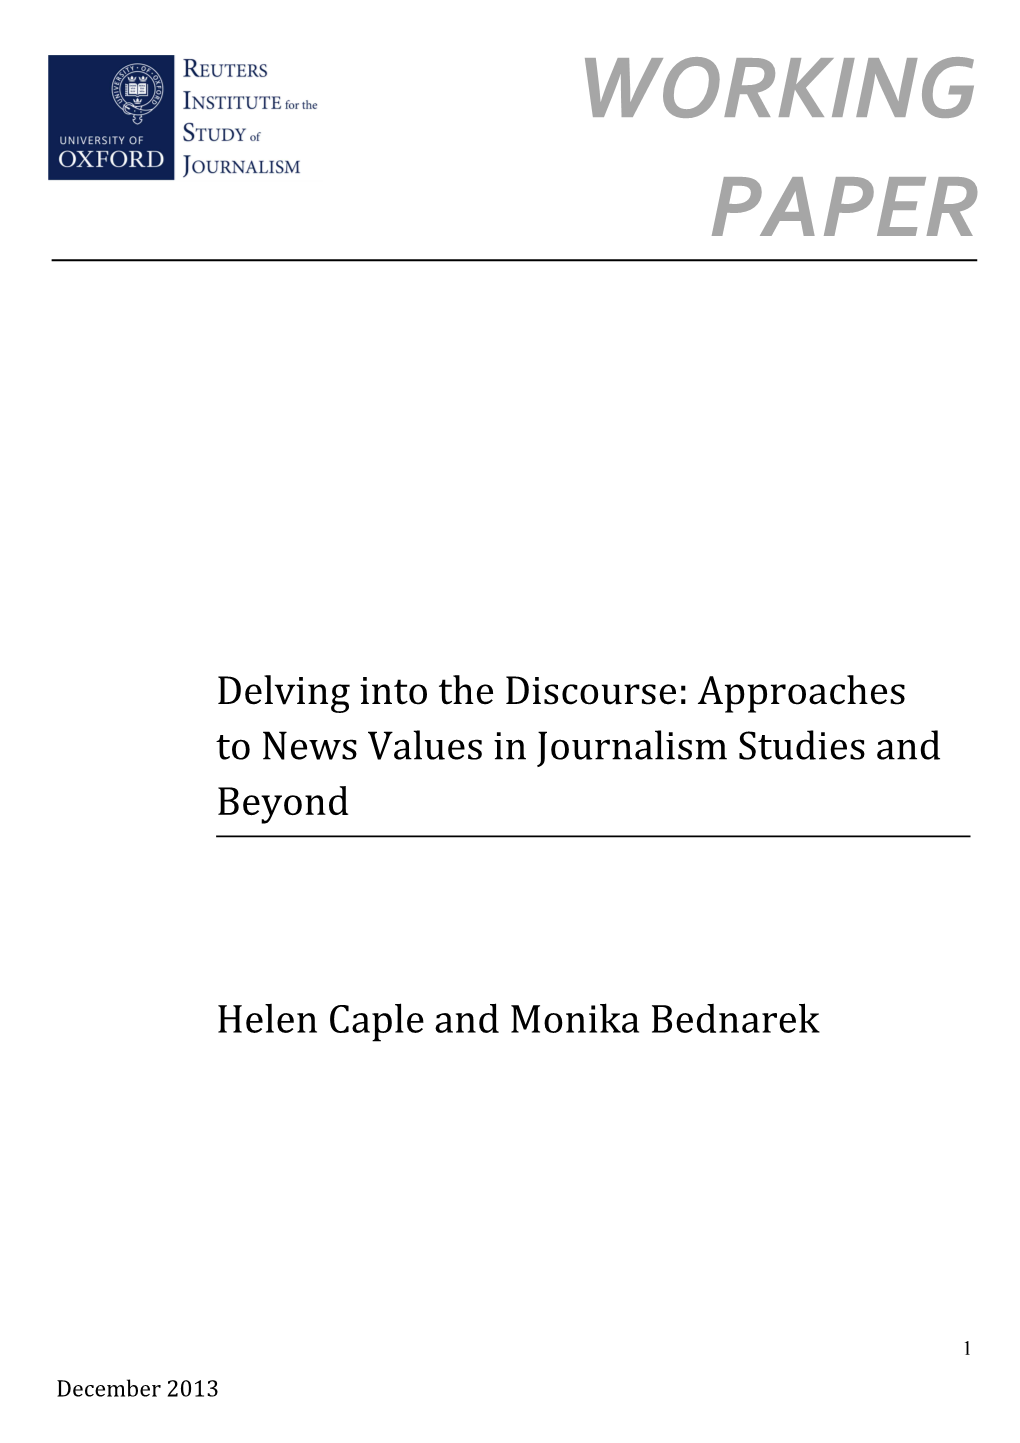 Delving Into the Discourse: Approaches to News Values in Journalism Studies and Beyond